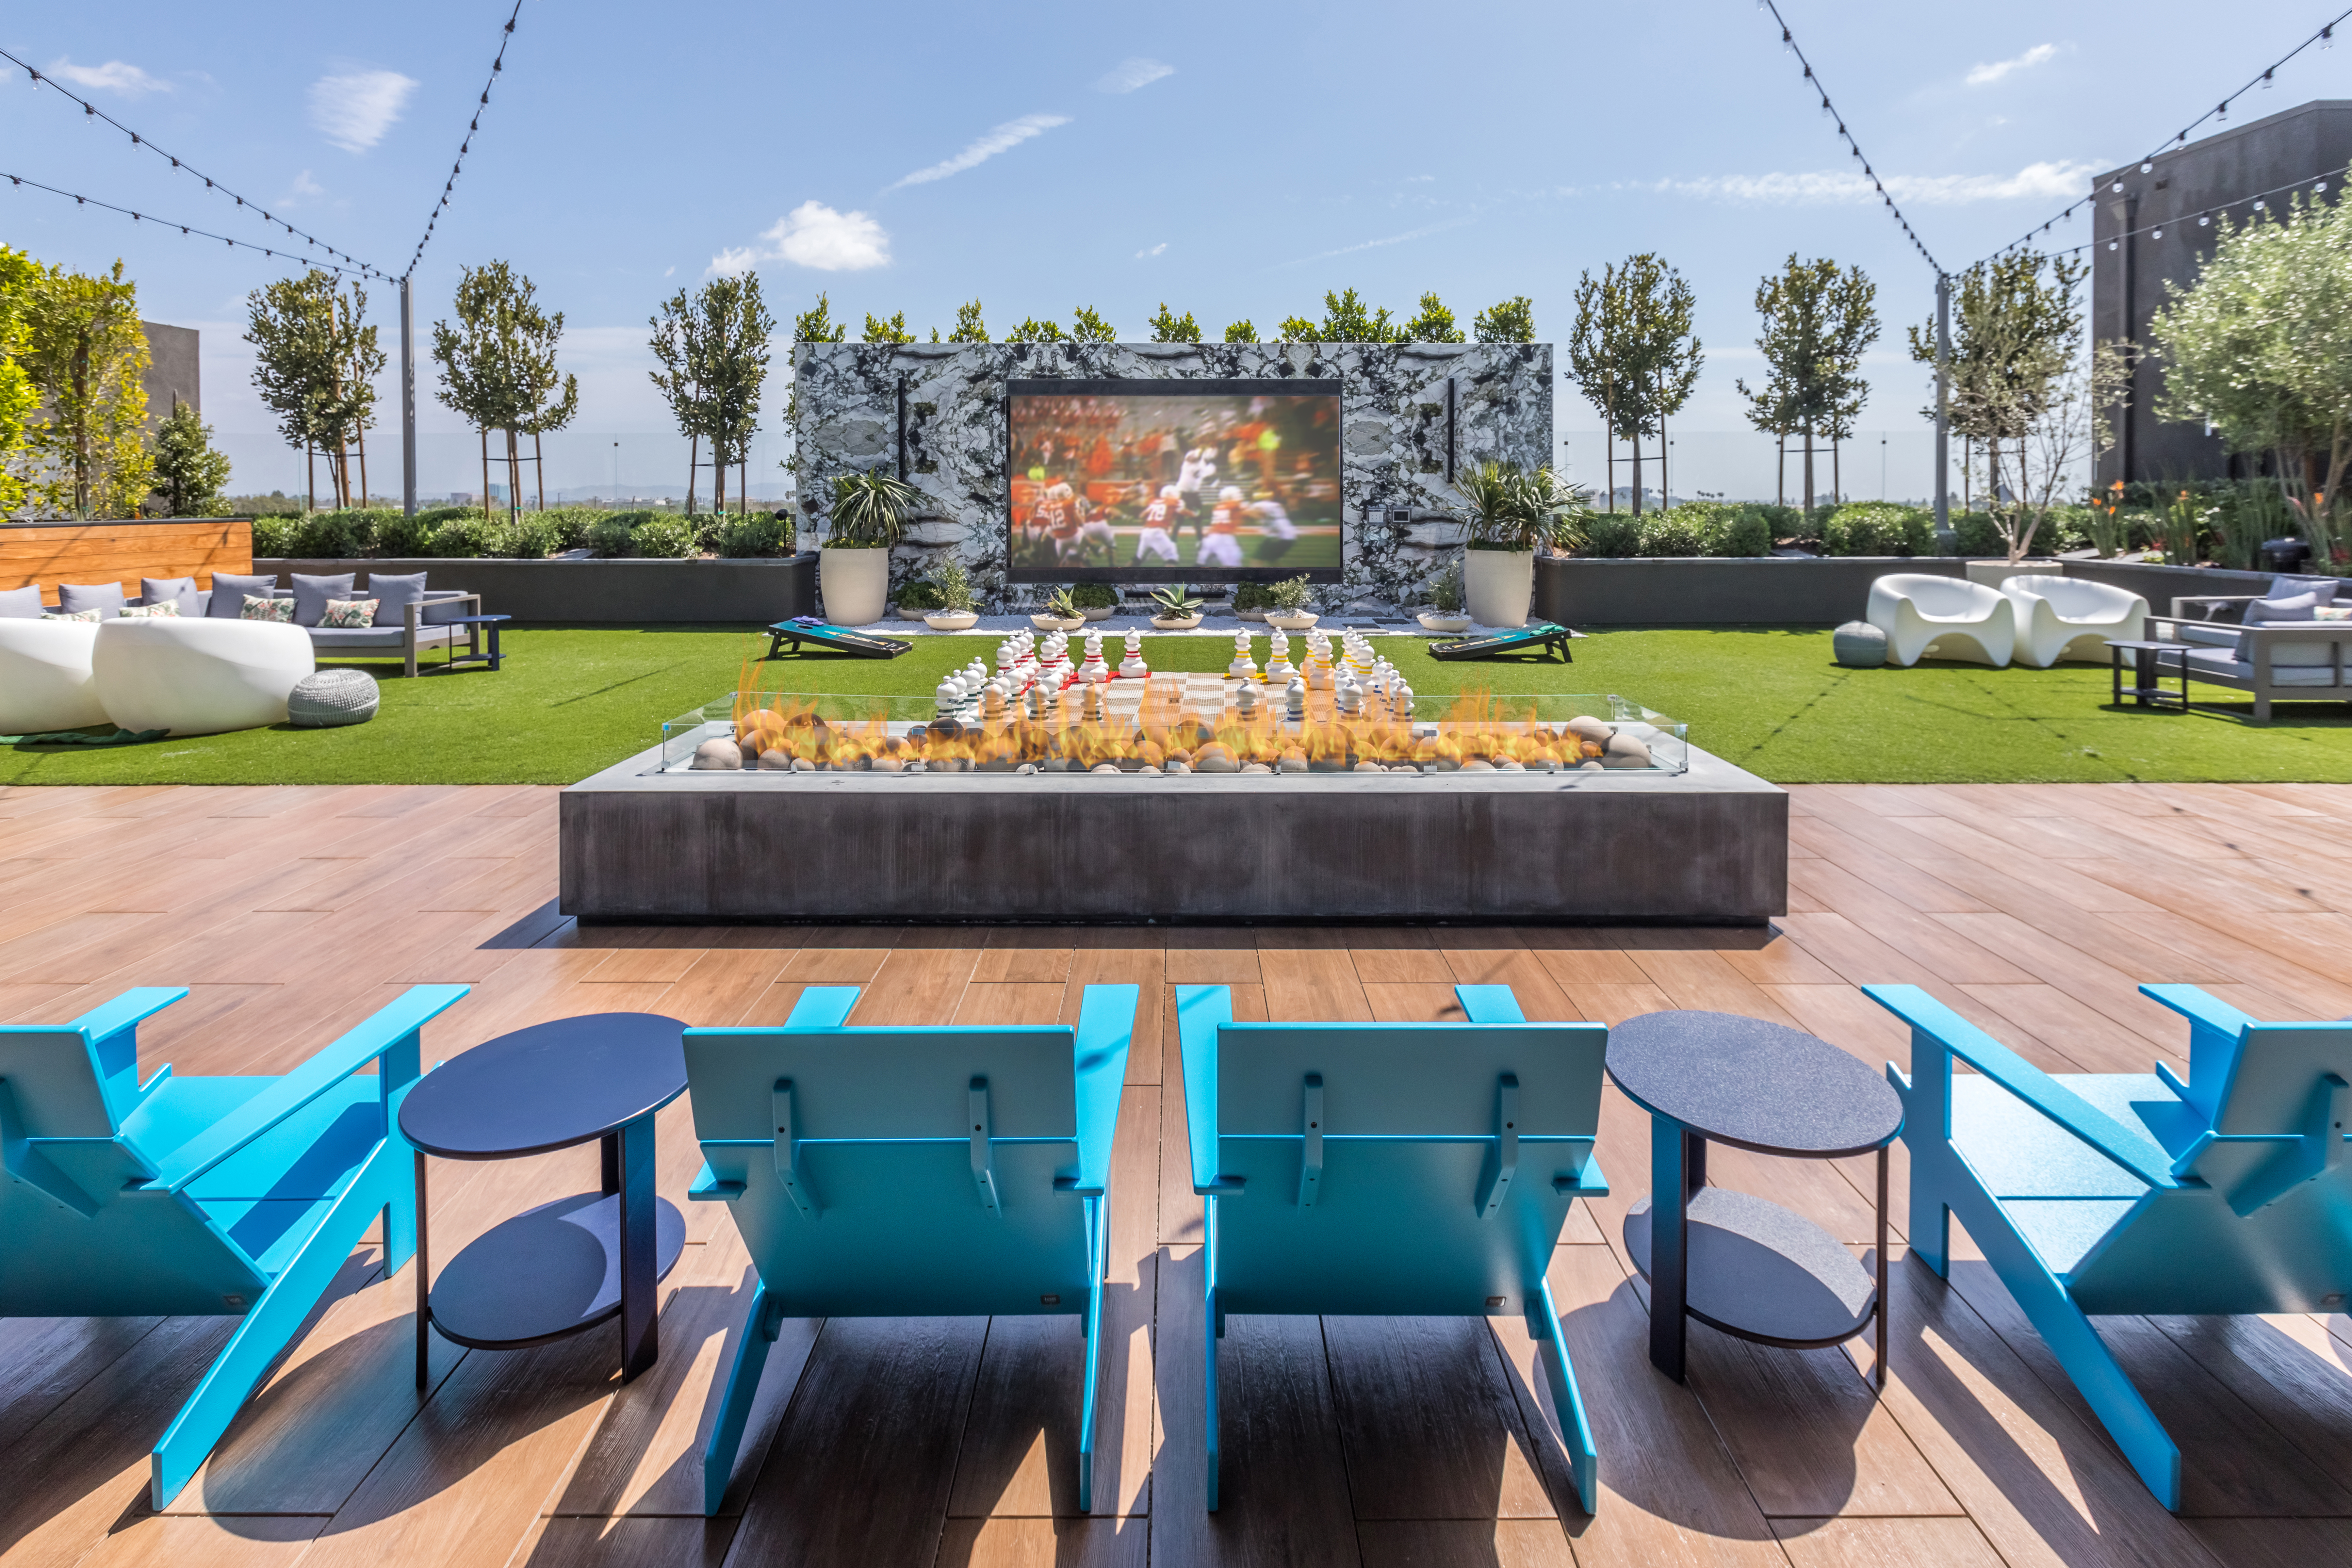 Four adirondack chairs seating before a long concrete fire table overlooking a large movie screen on artificial turf.